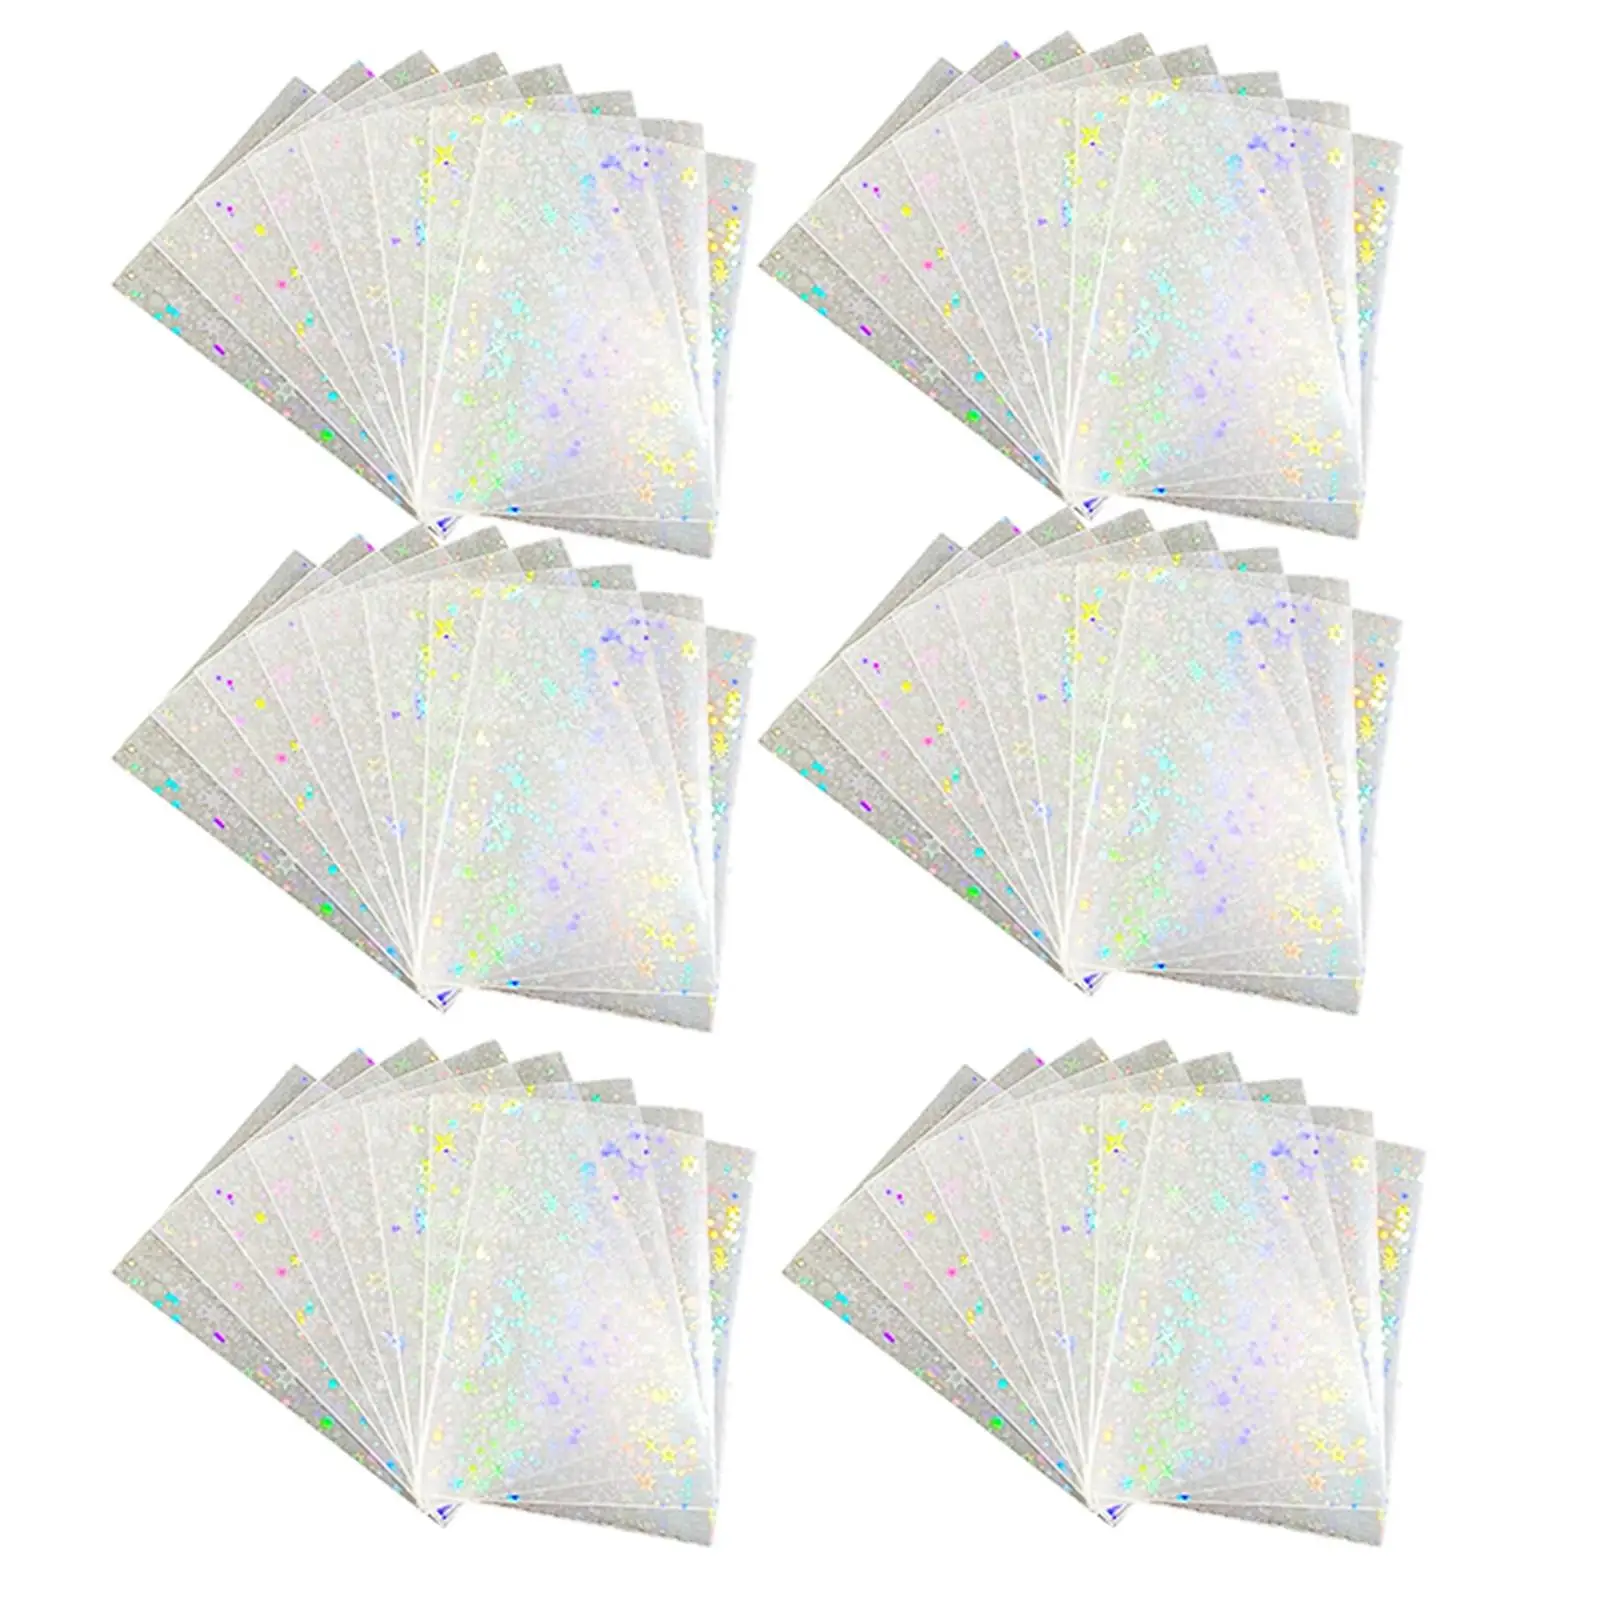 50 Pieces Holographic Card Sleeve Stardard Size Card Cover Game Card Sleeves Card Protective Holder Trading Card Cover